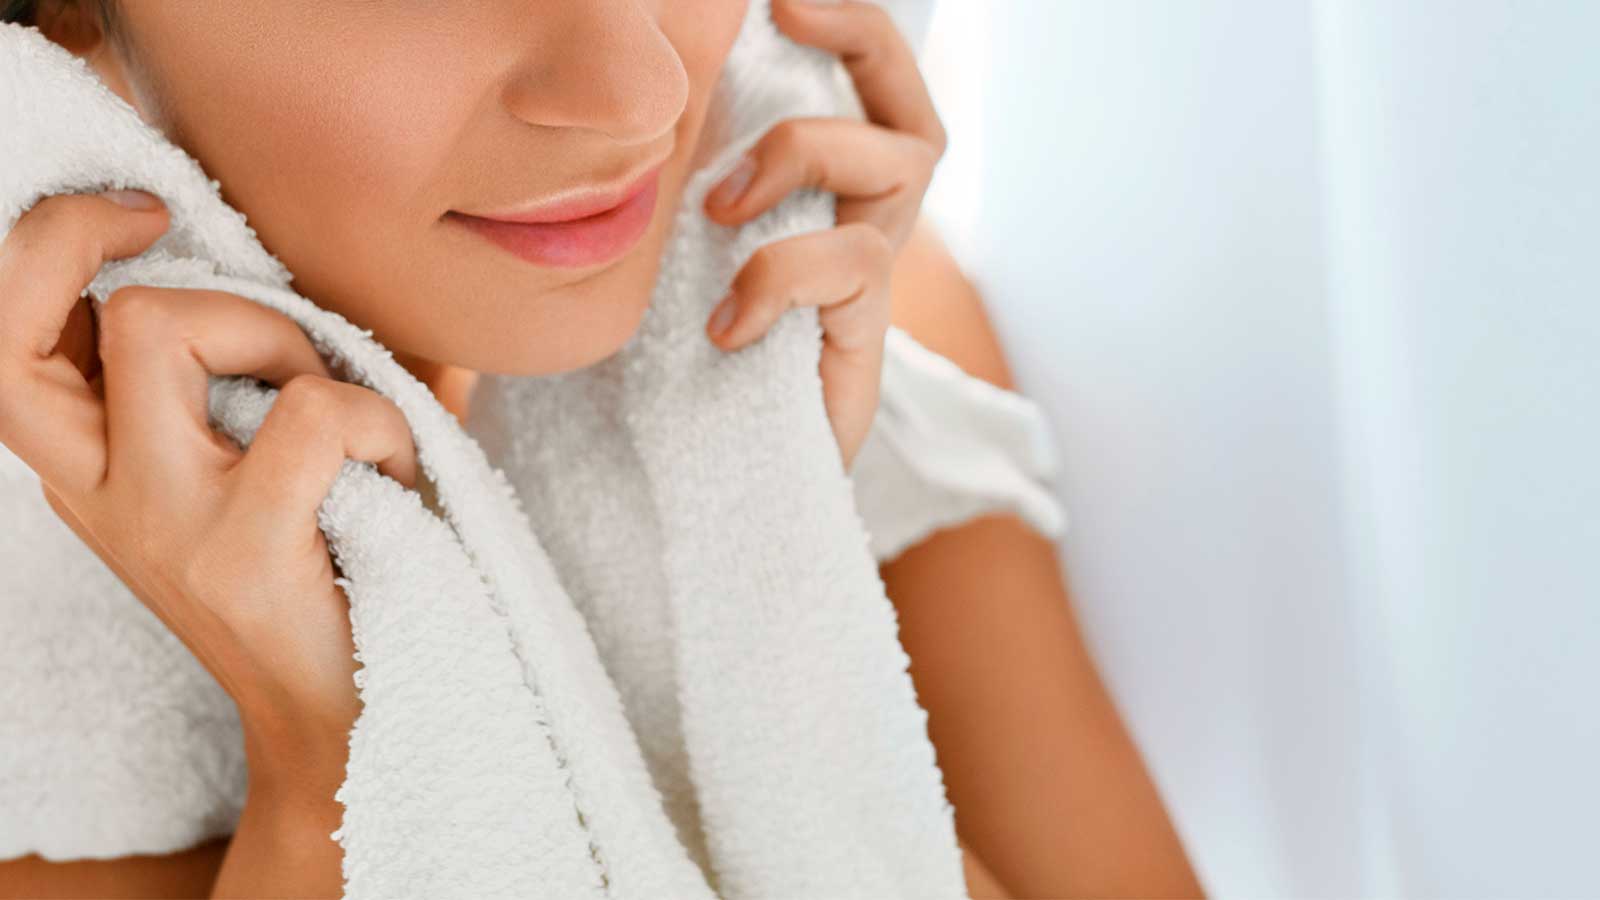 Hydrate Your Face Skin with Warm, Damp Wash Cloth to Shave More Easily